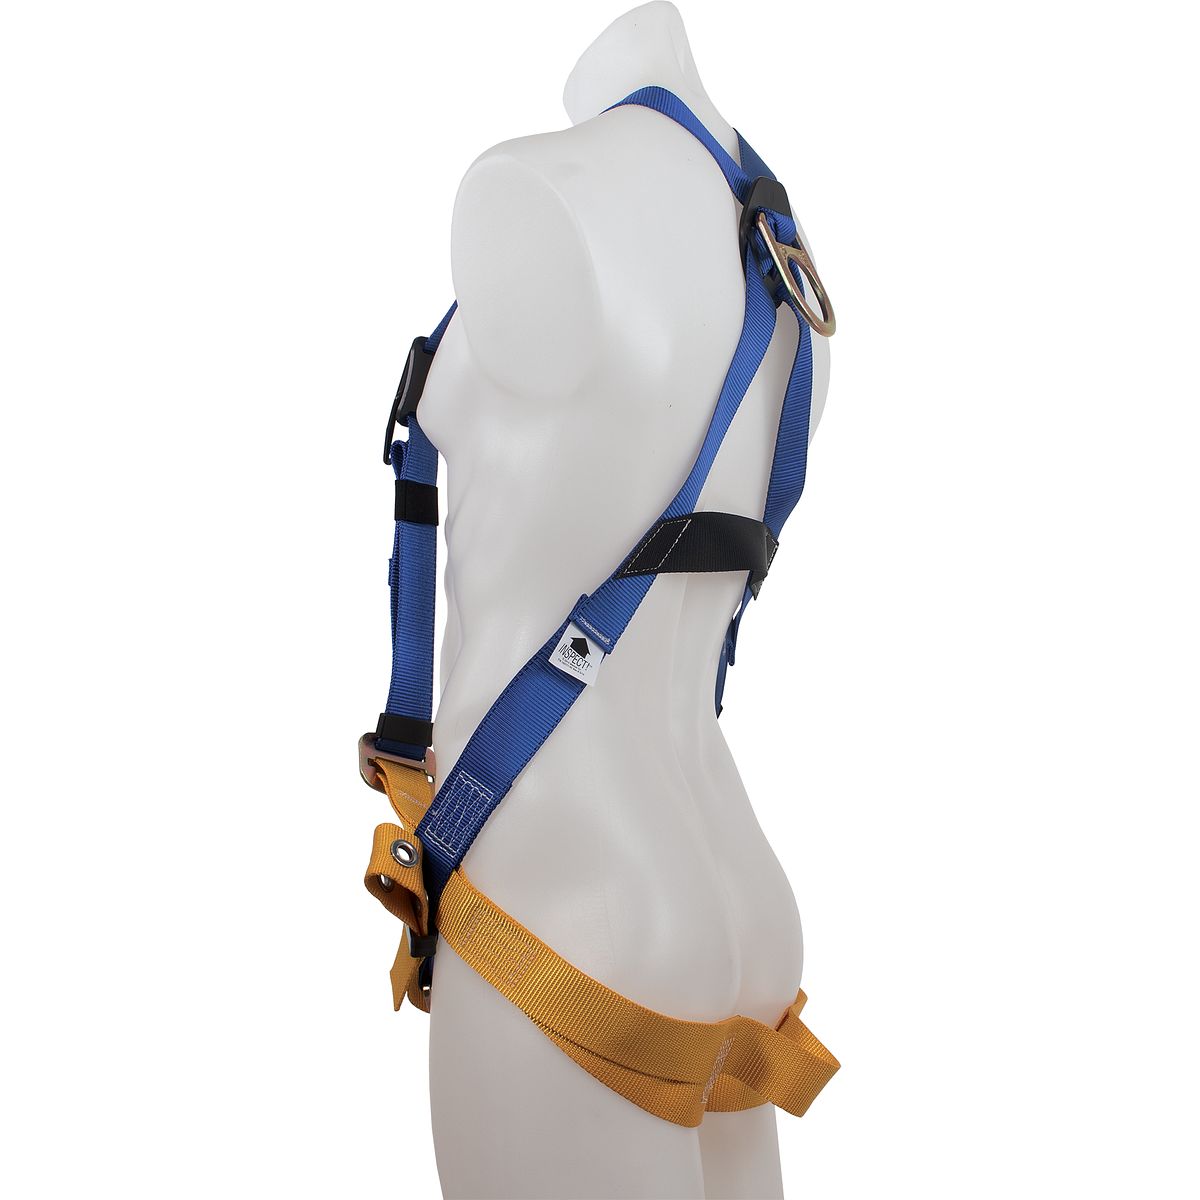 Victor Fitness VFHHB Durable Nylon Head Harness with D-Rings